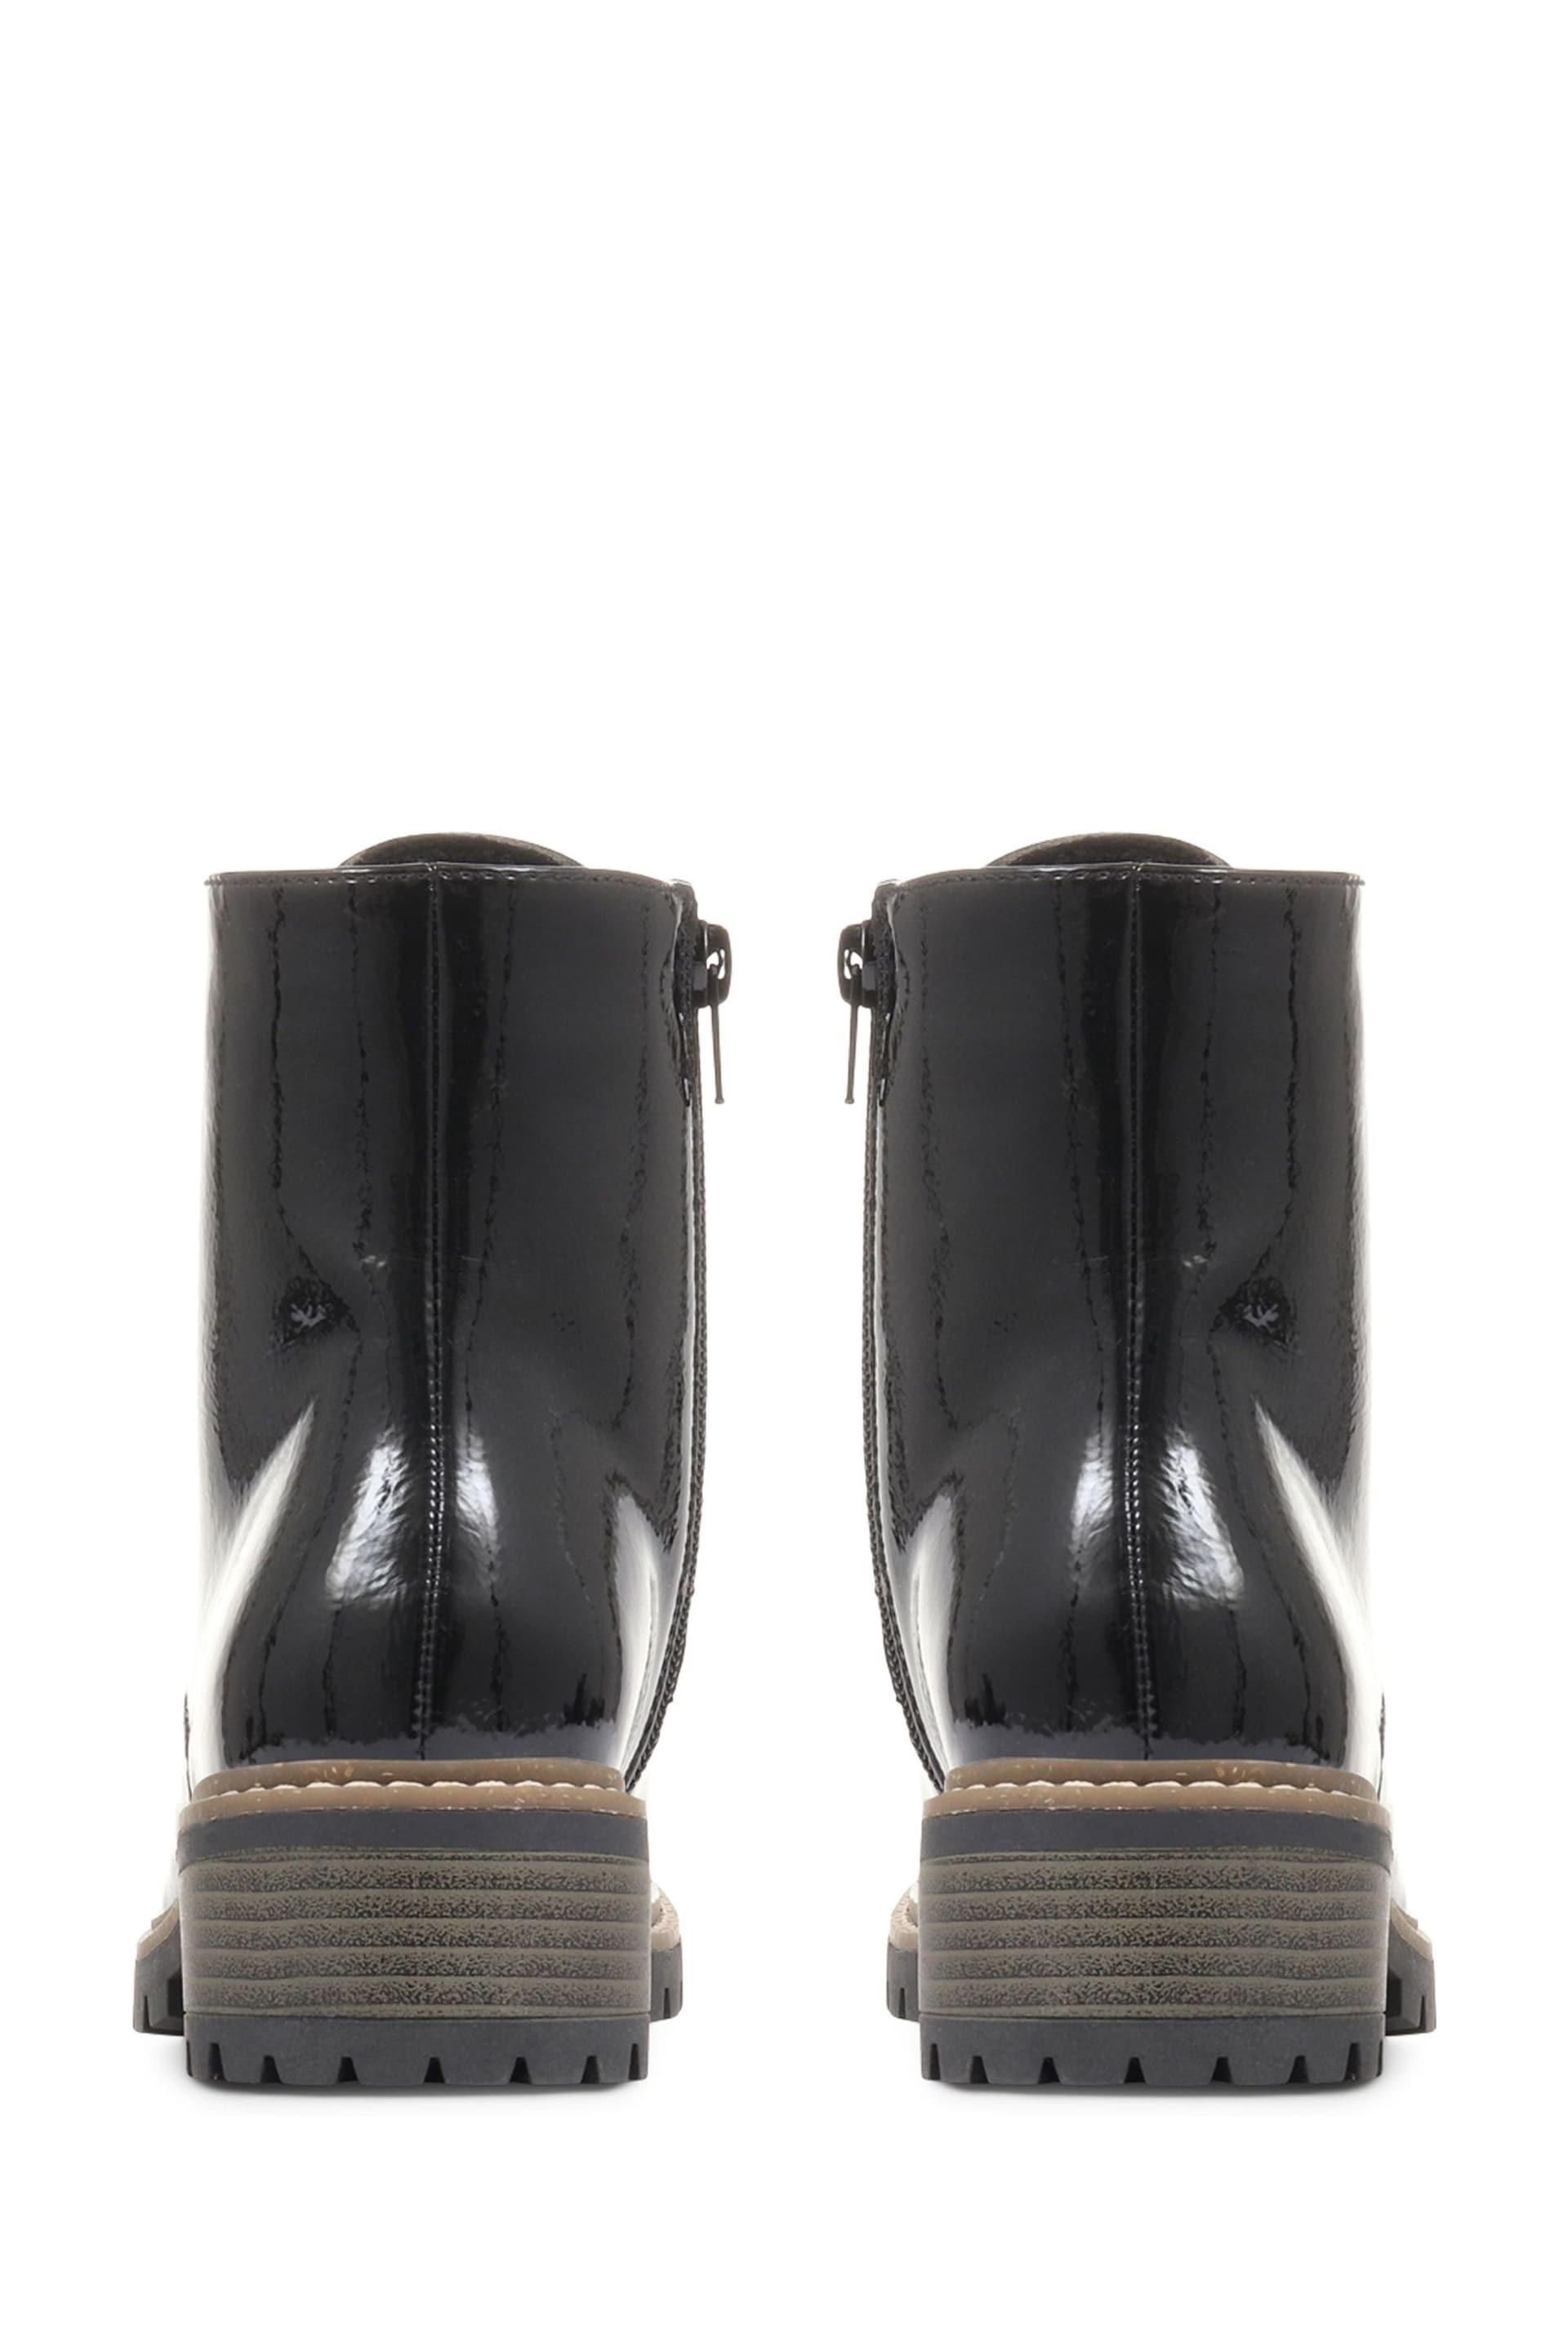 Pavers Metallic Lace Up Ankle Black Boots - Image 3 of 6